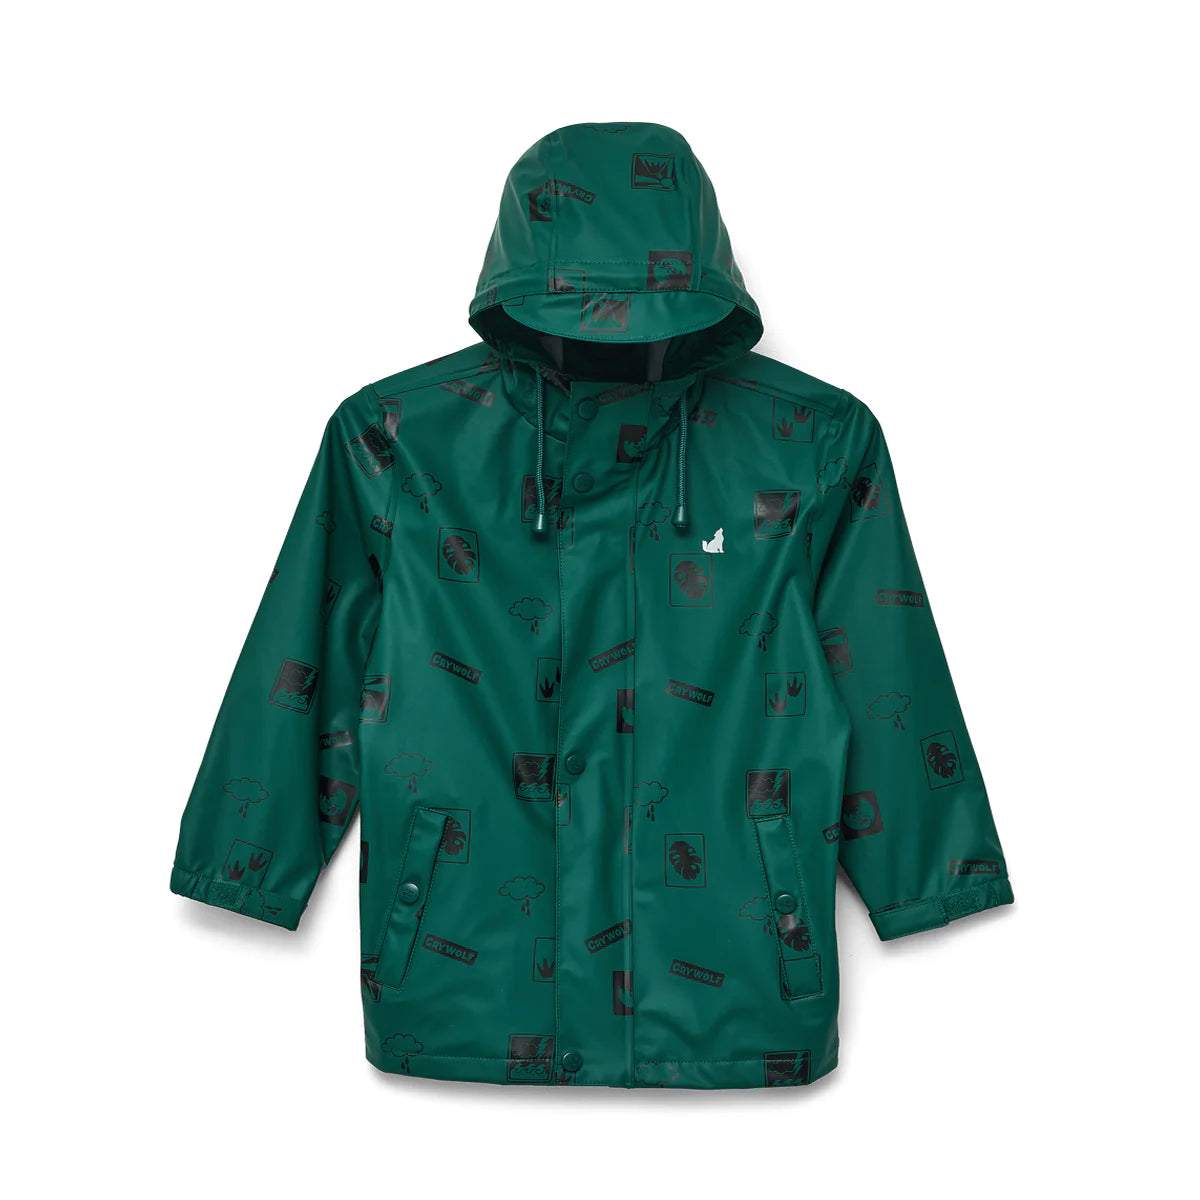 Lucca Play Jacket - Land Before Time